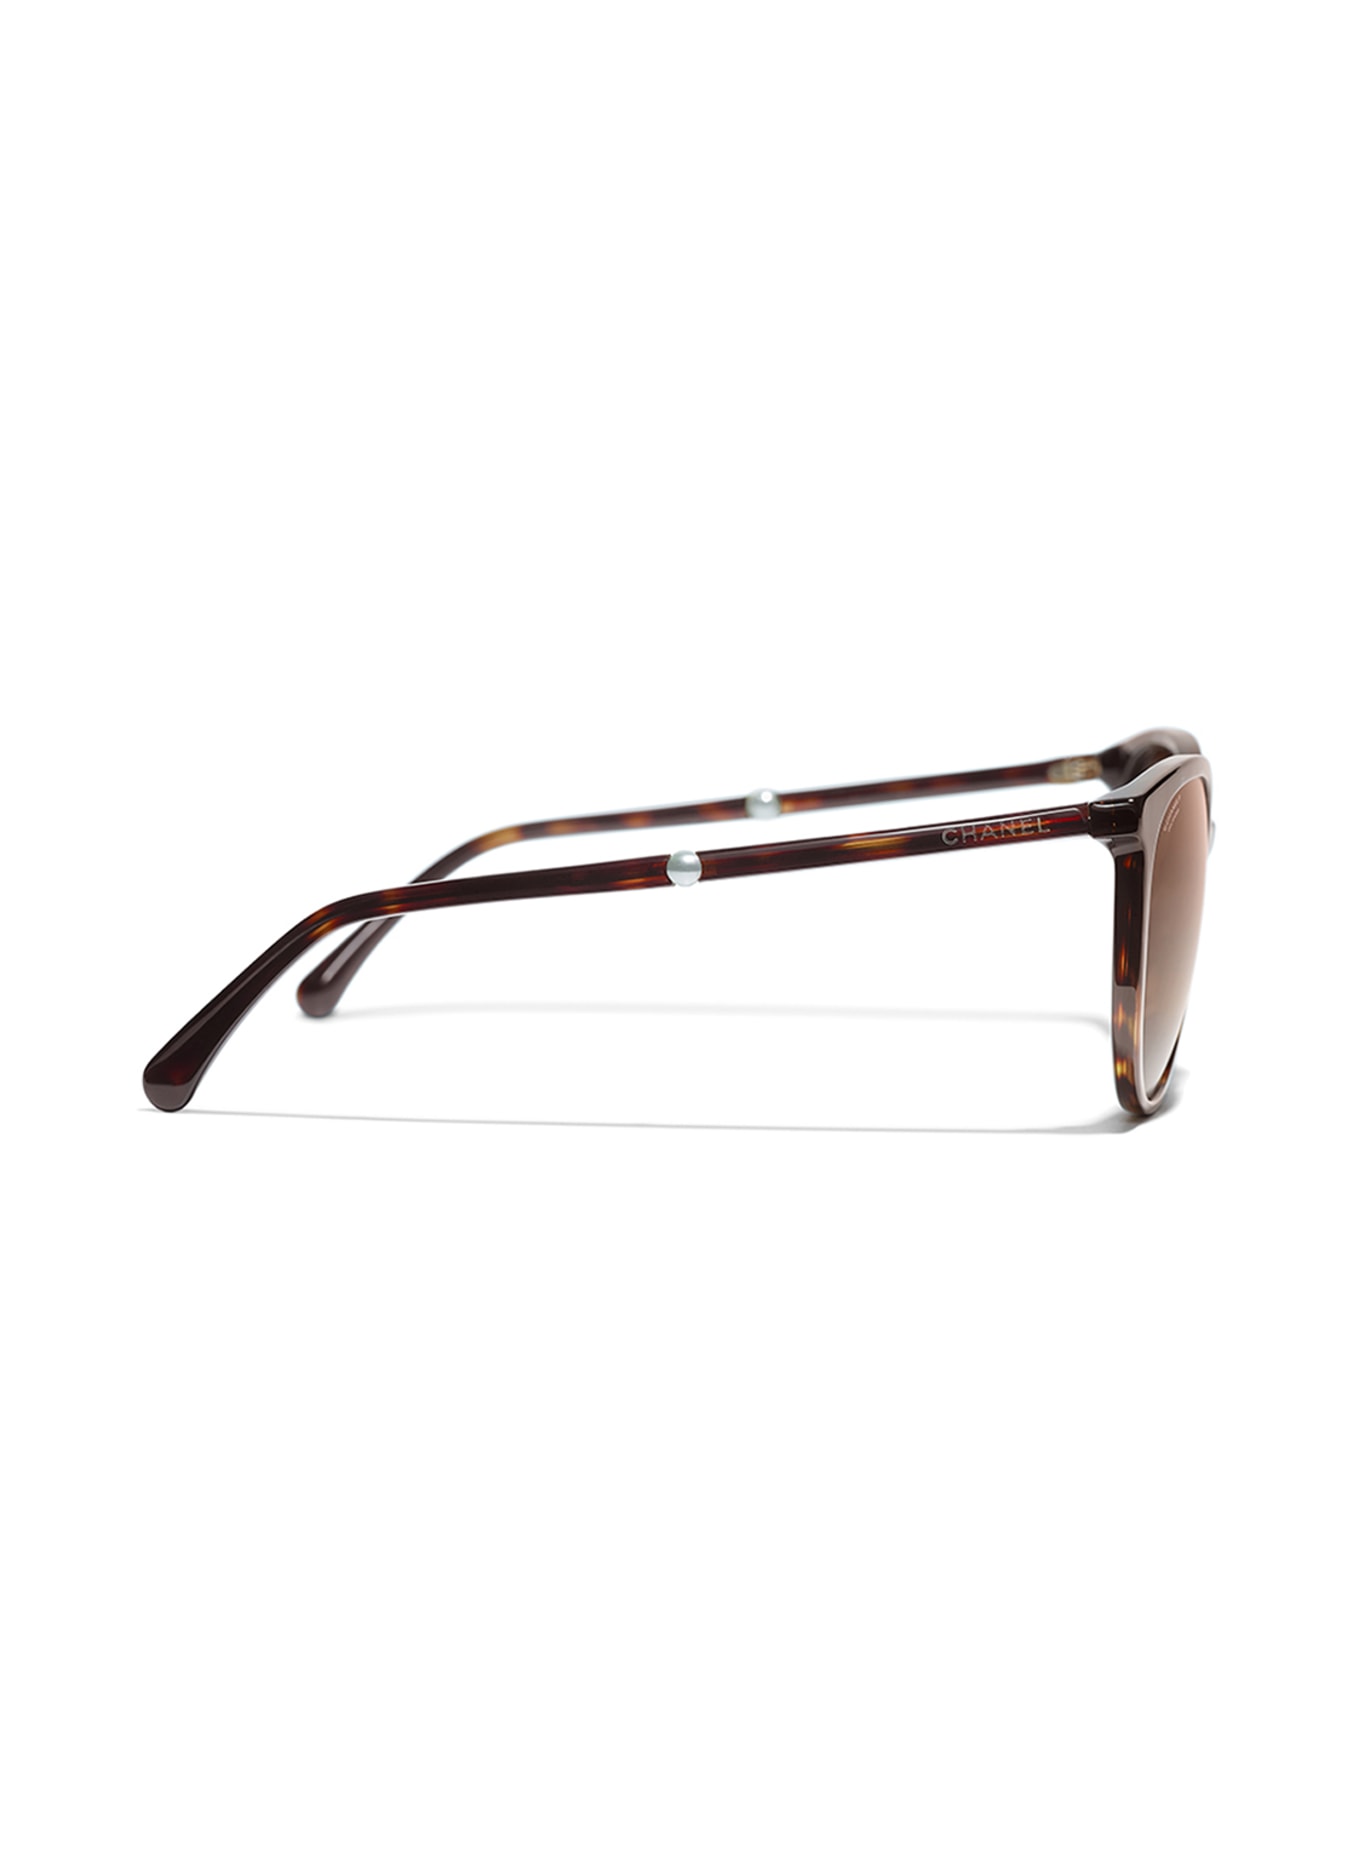 CHANEL Butterfly sunglasses, Color: C714S9 - HAVANA/BROWN (Image 3)